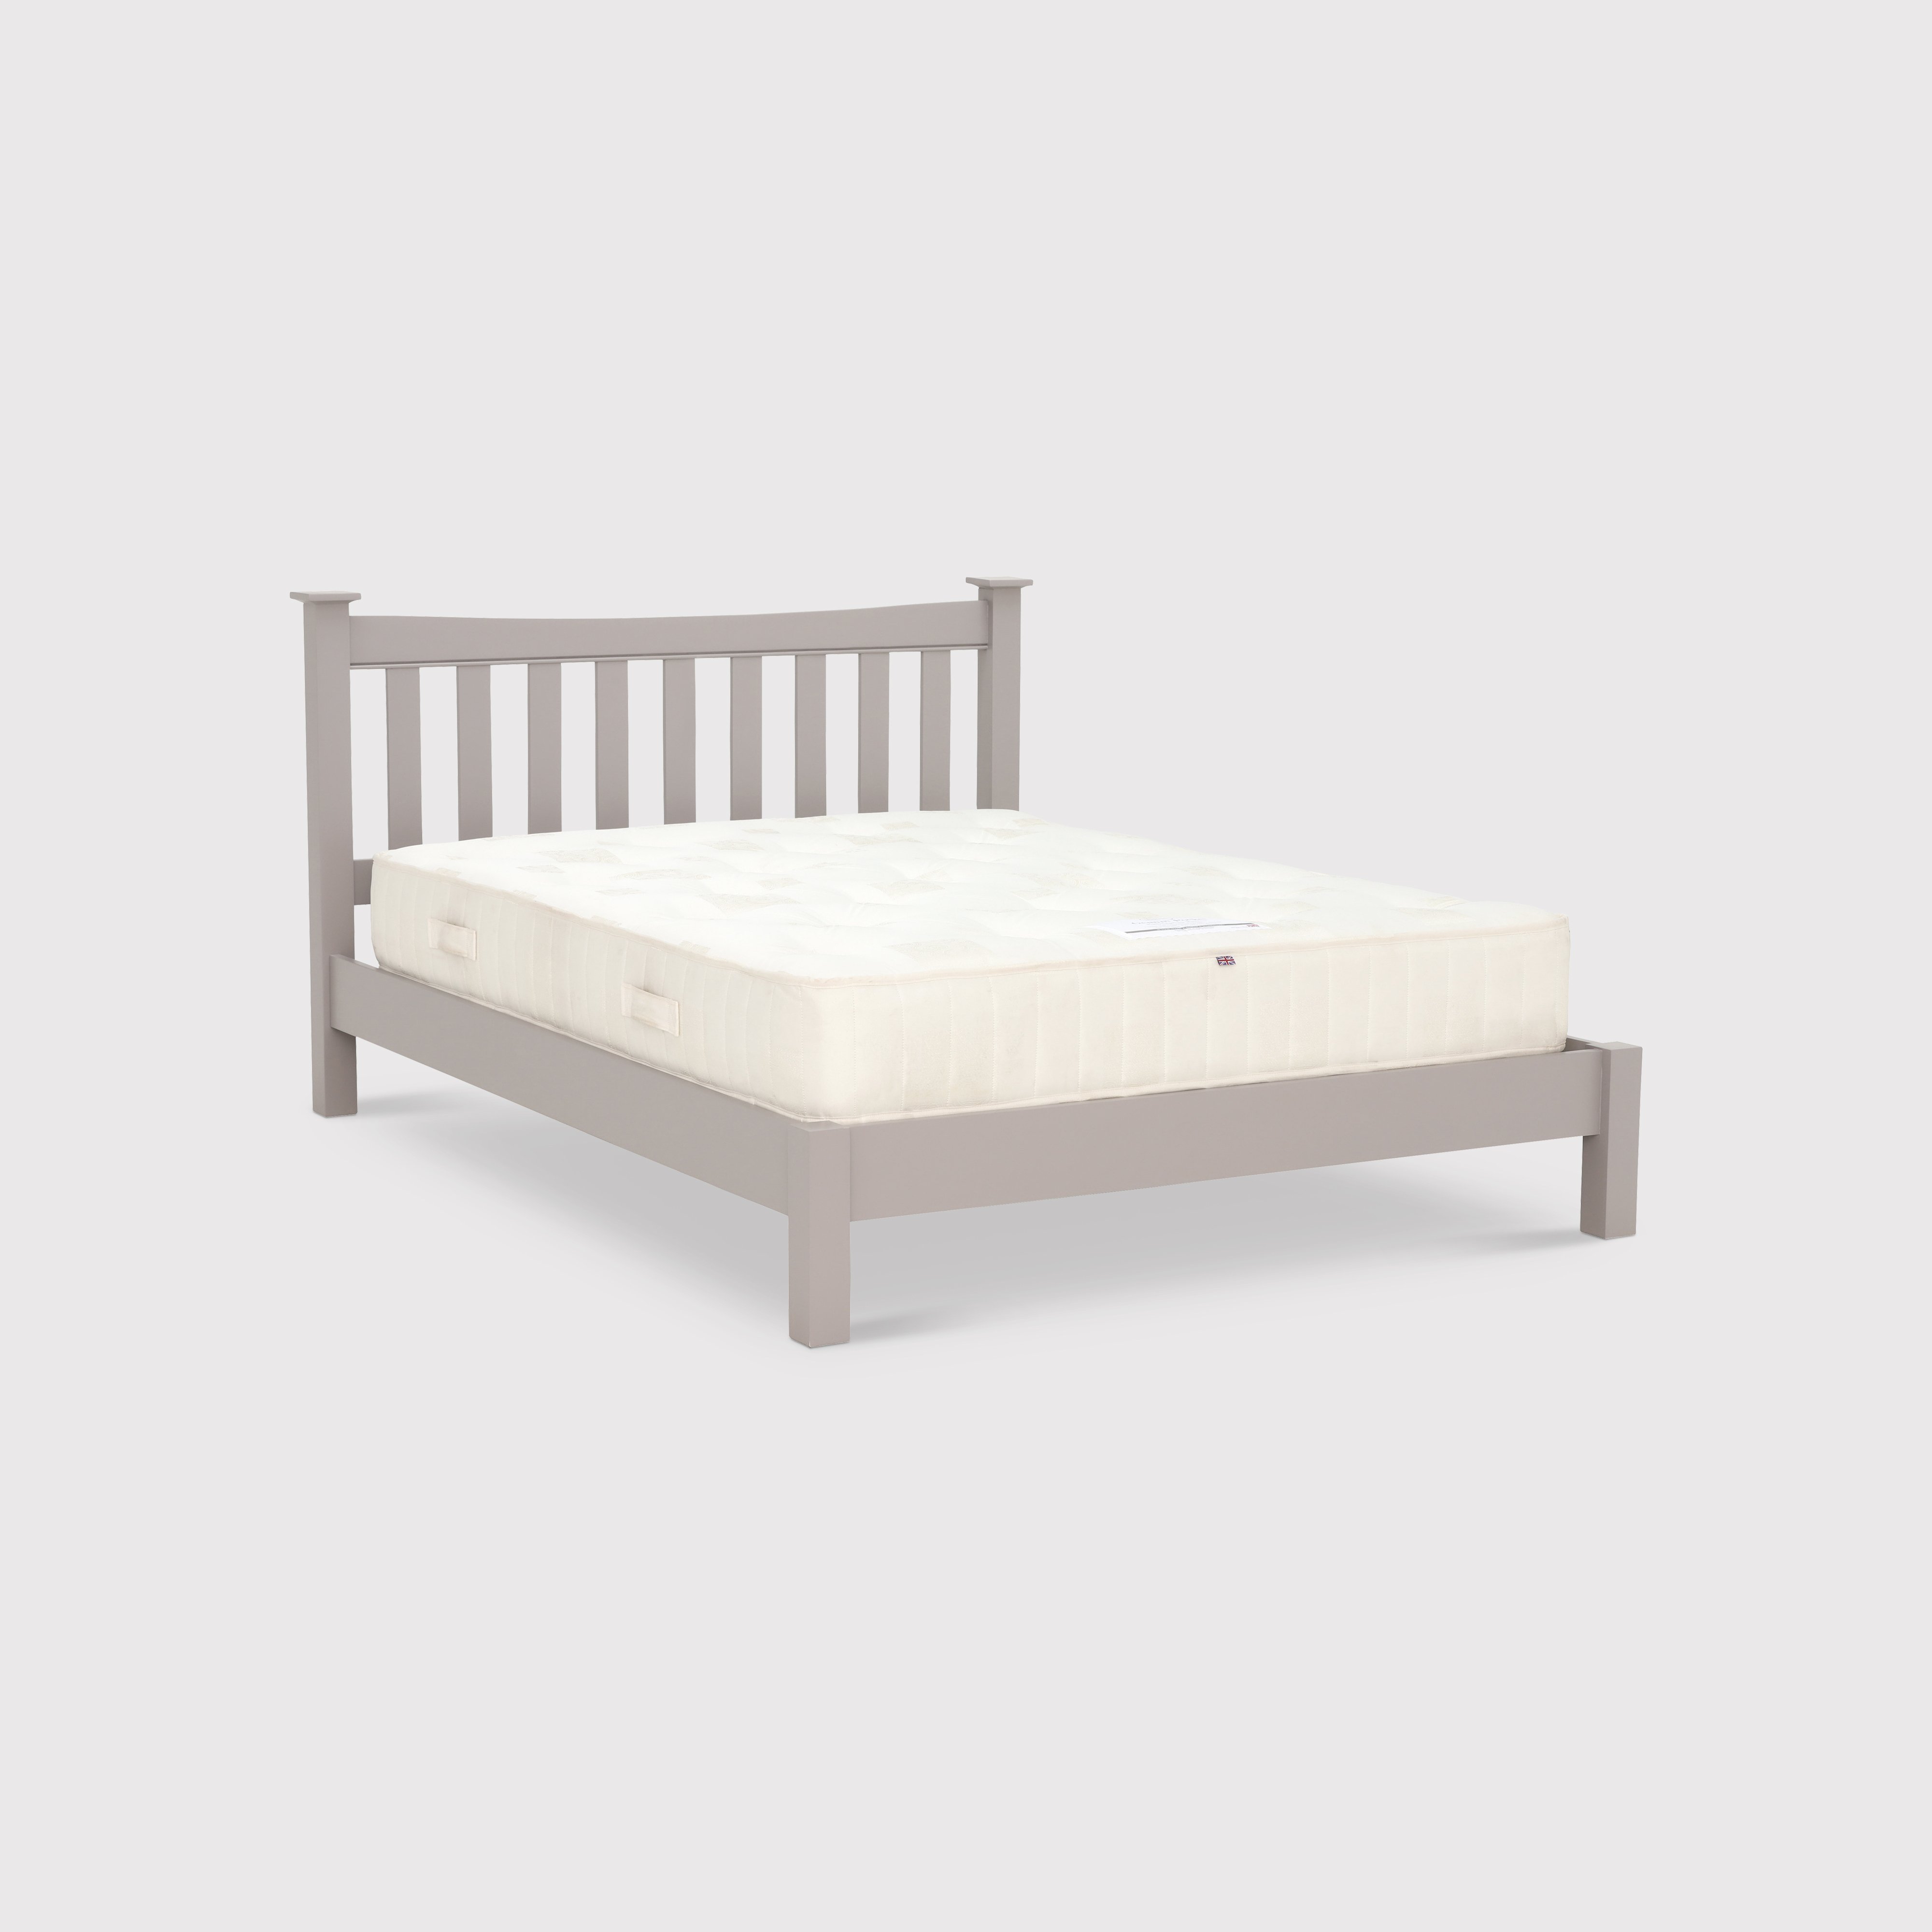 Helmsley 135cm Bed Frame, Grey Wood | Double | Barker & Stonehouse